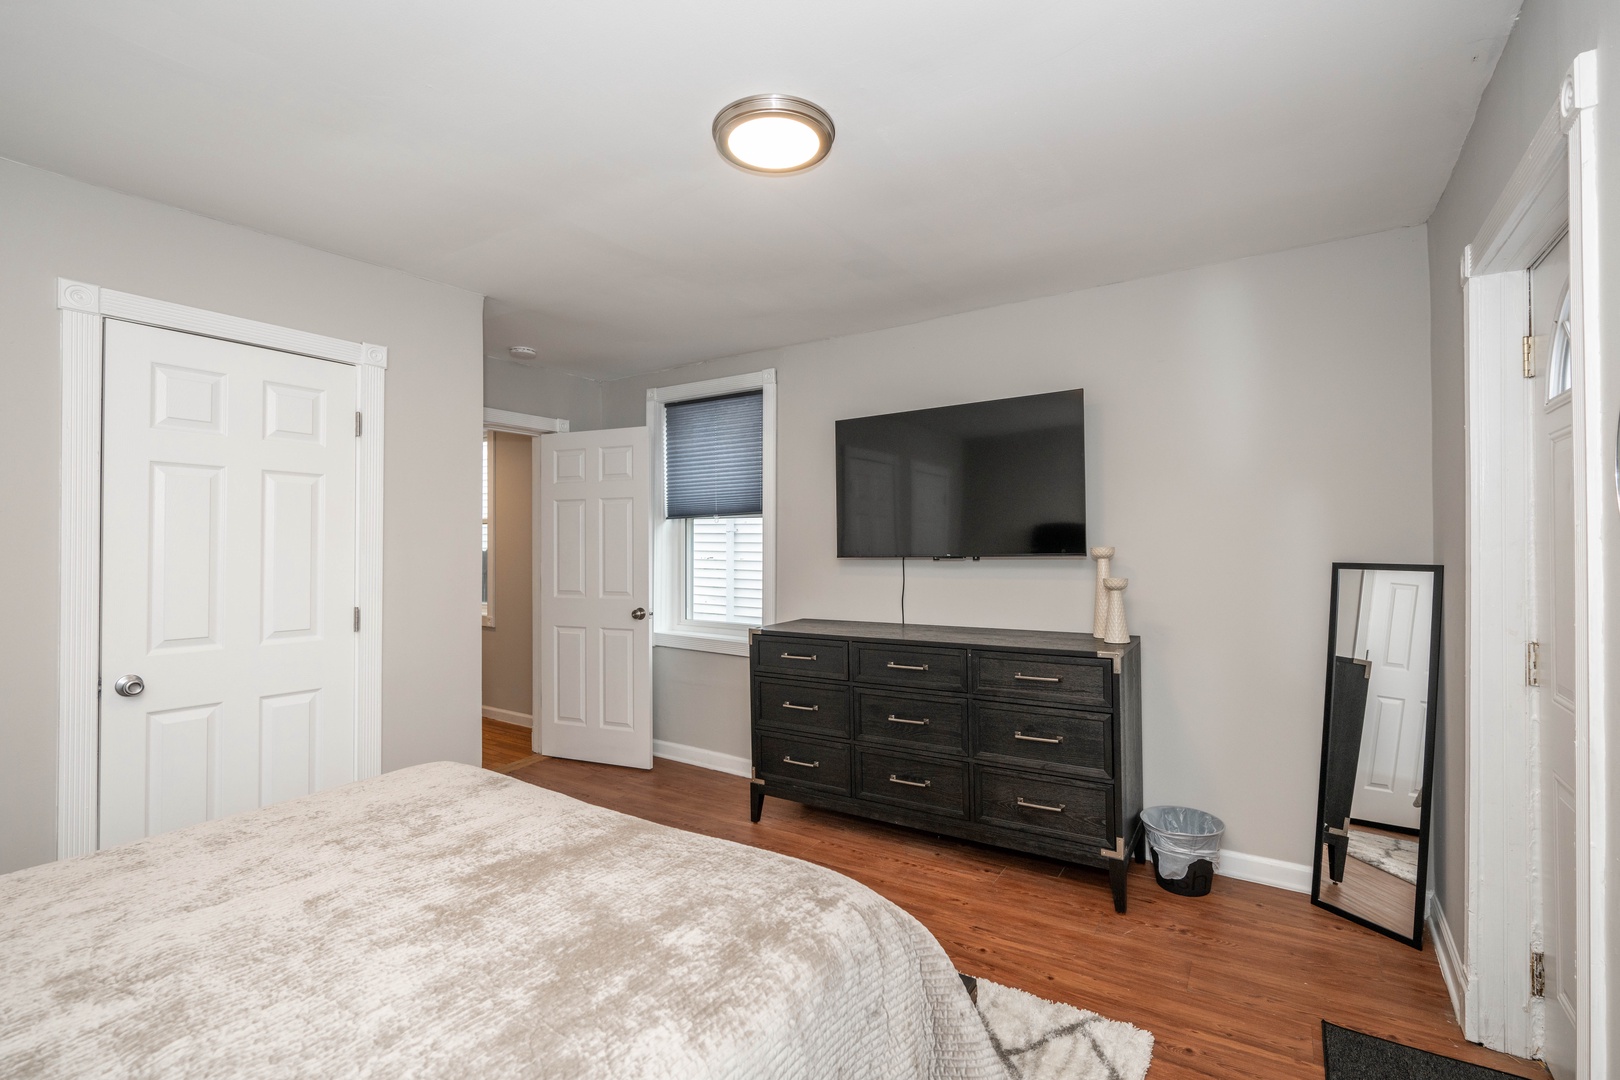 The first bedroom retreat boasts a plush queen bed, Smart TV, & balcony